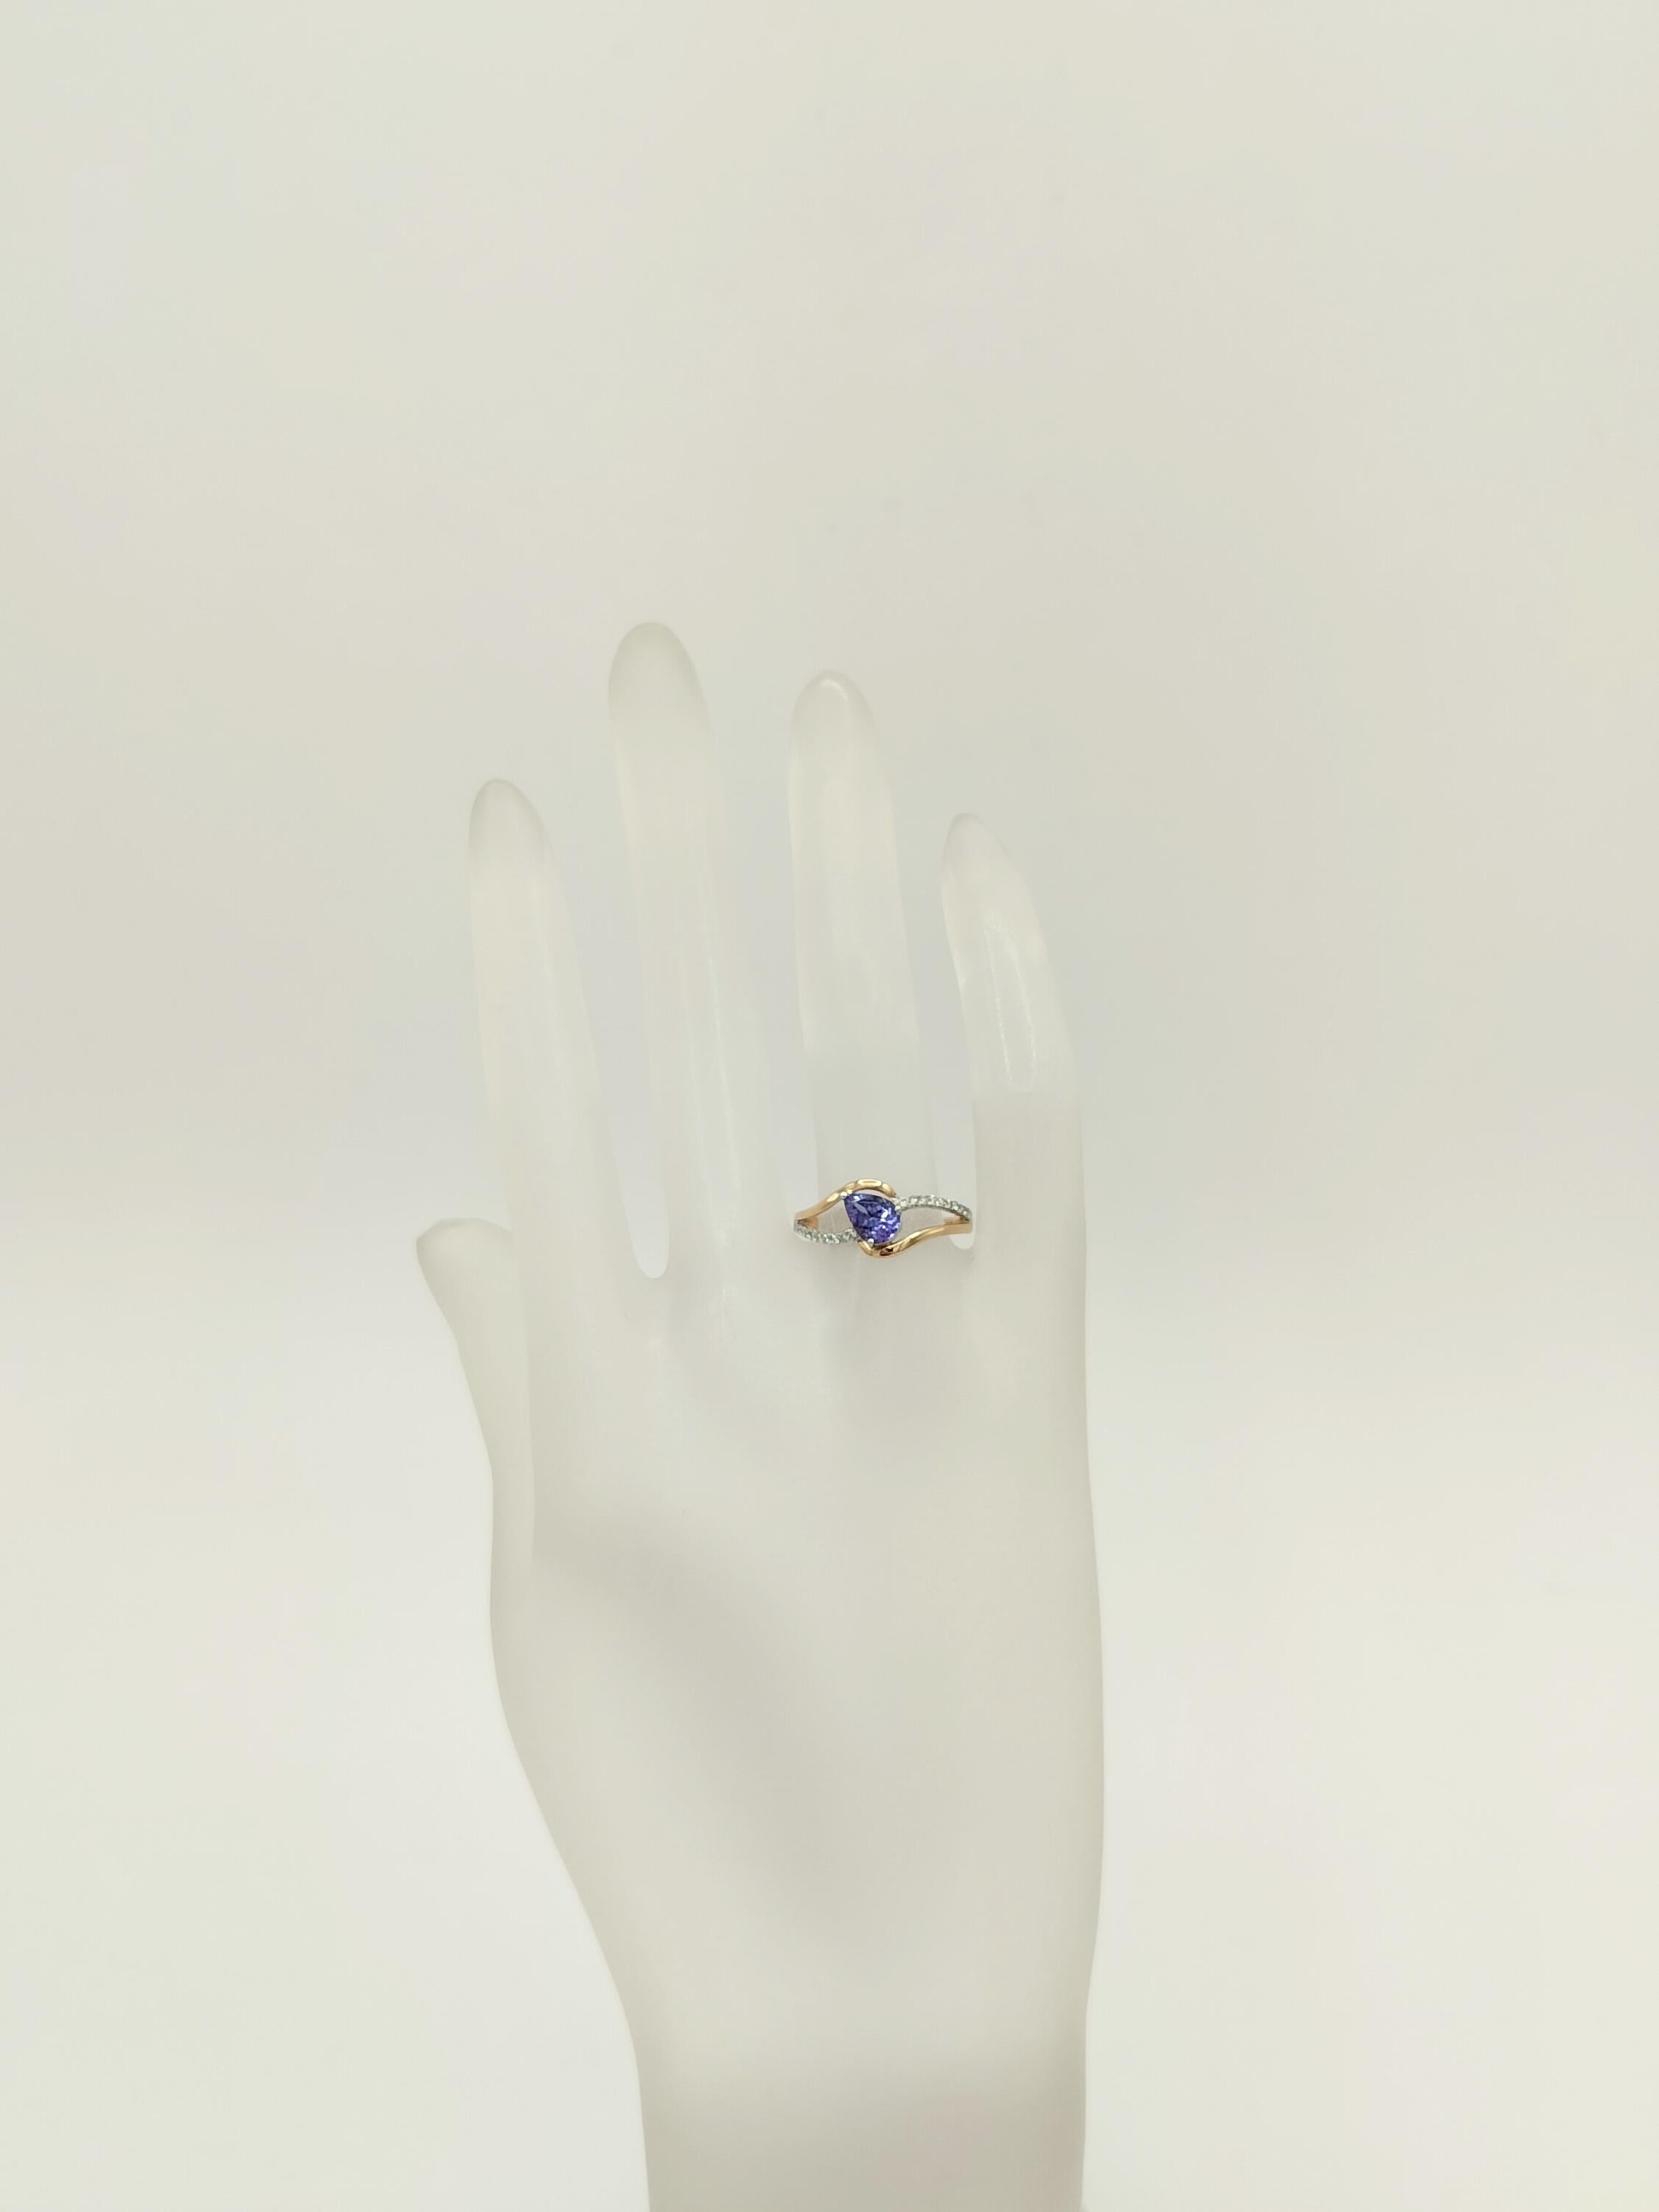 Pear Cut Tanzanite and White Diamond Ring in 14K 2 Tone Gold For Sale